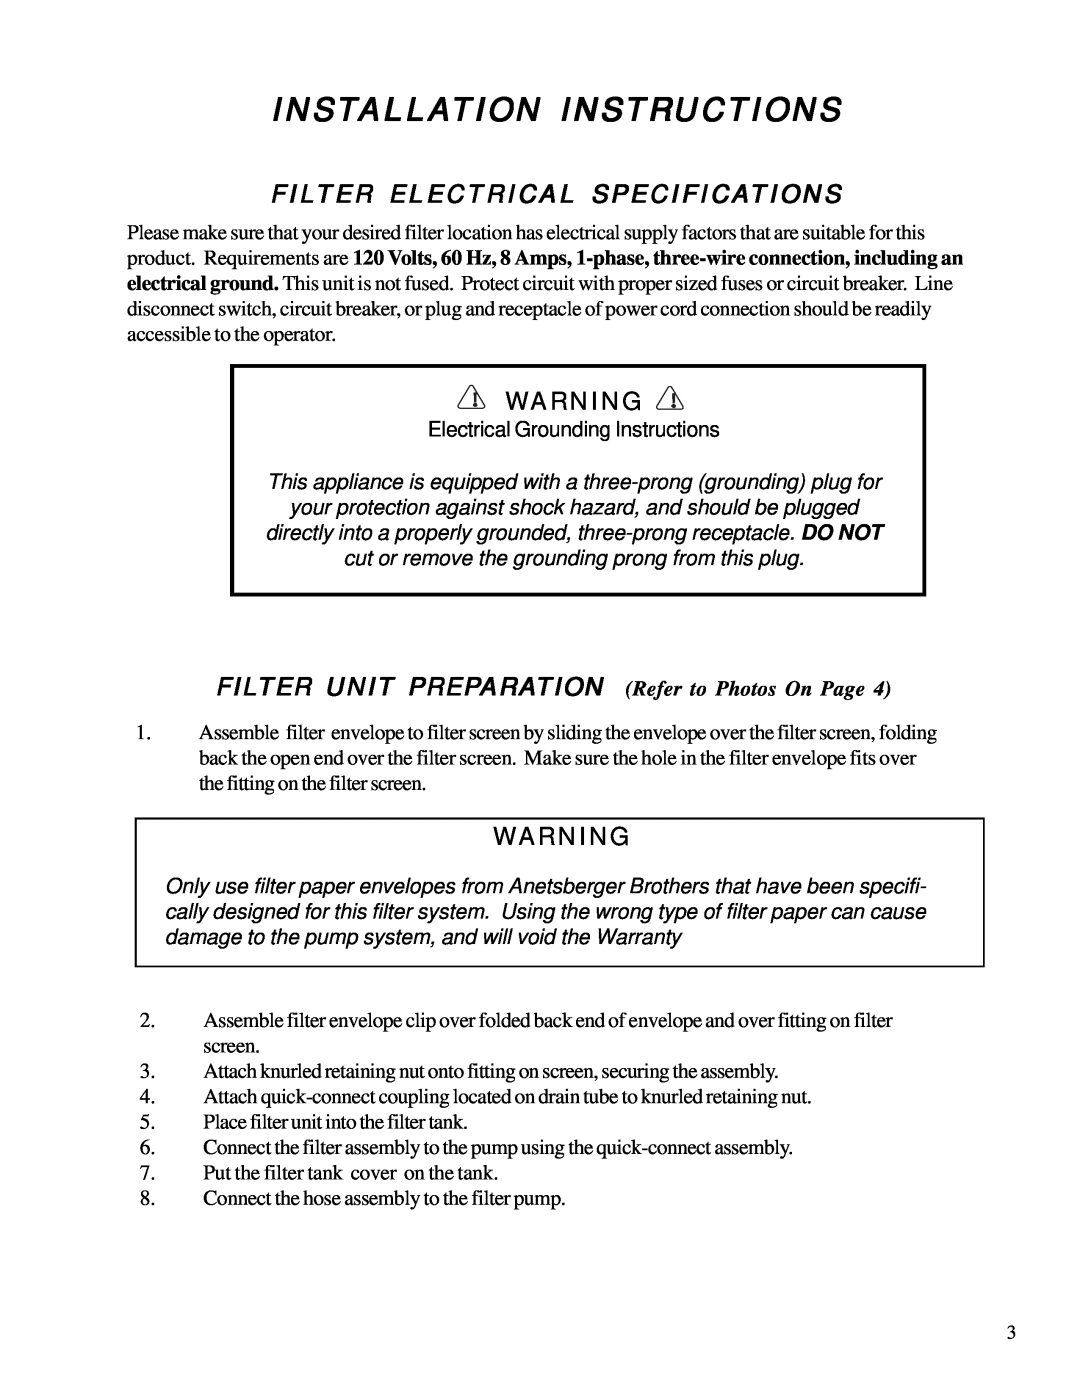 Anetsberger Brothers FFM-150, FFM-80 warranty Installation Instructions, Filter Electrical Specifications 